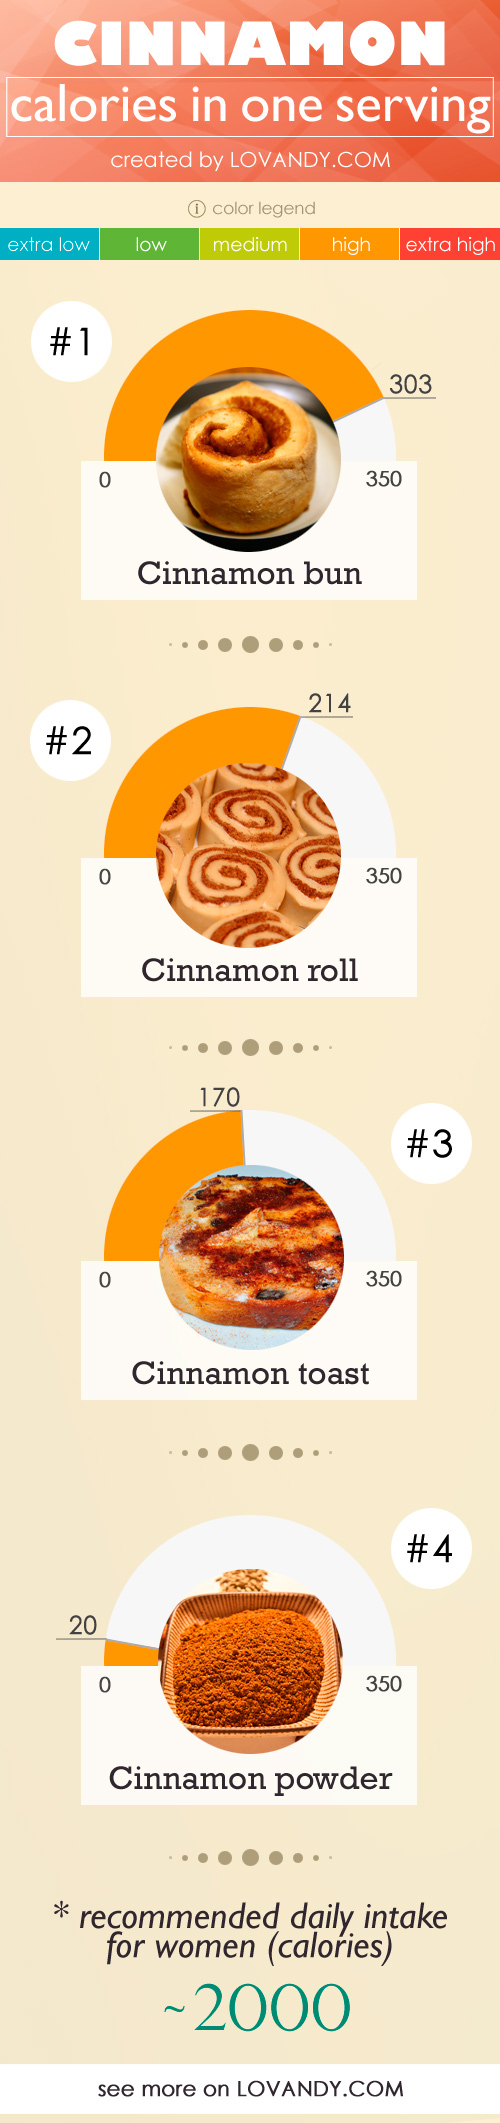 how many calories in a teaspoon of cinnamon